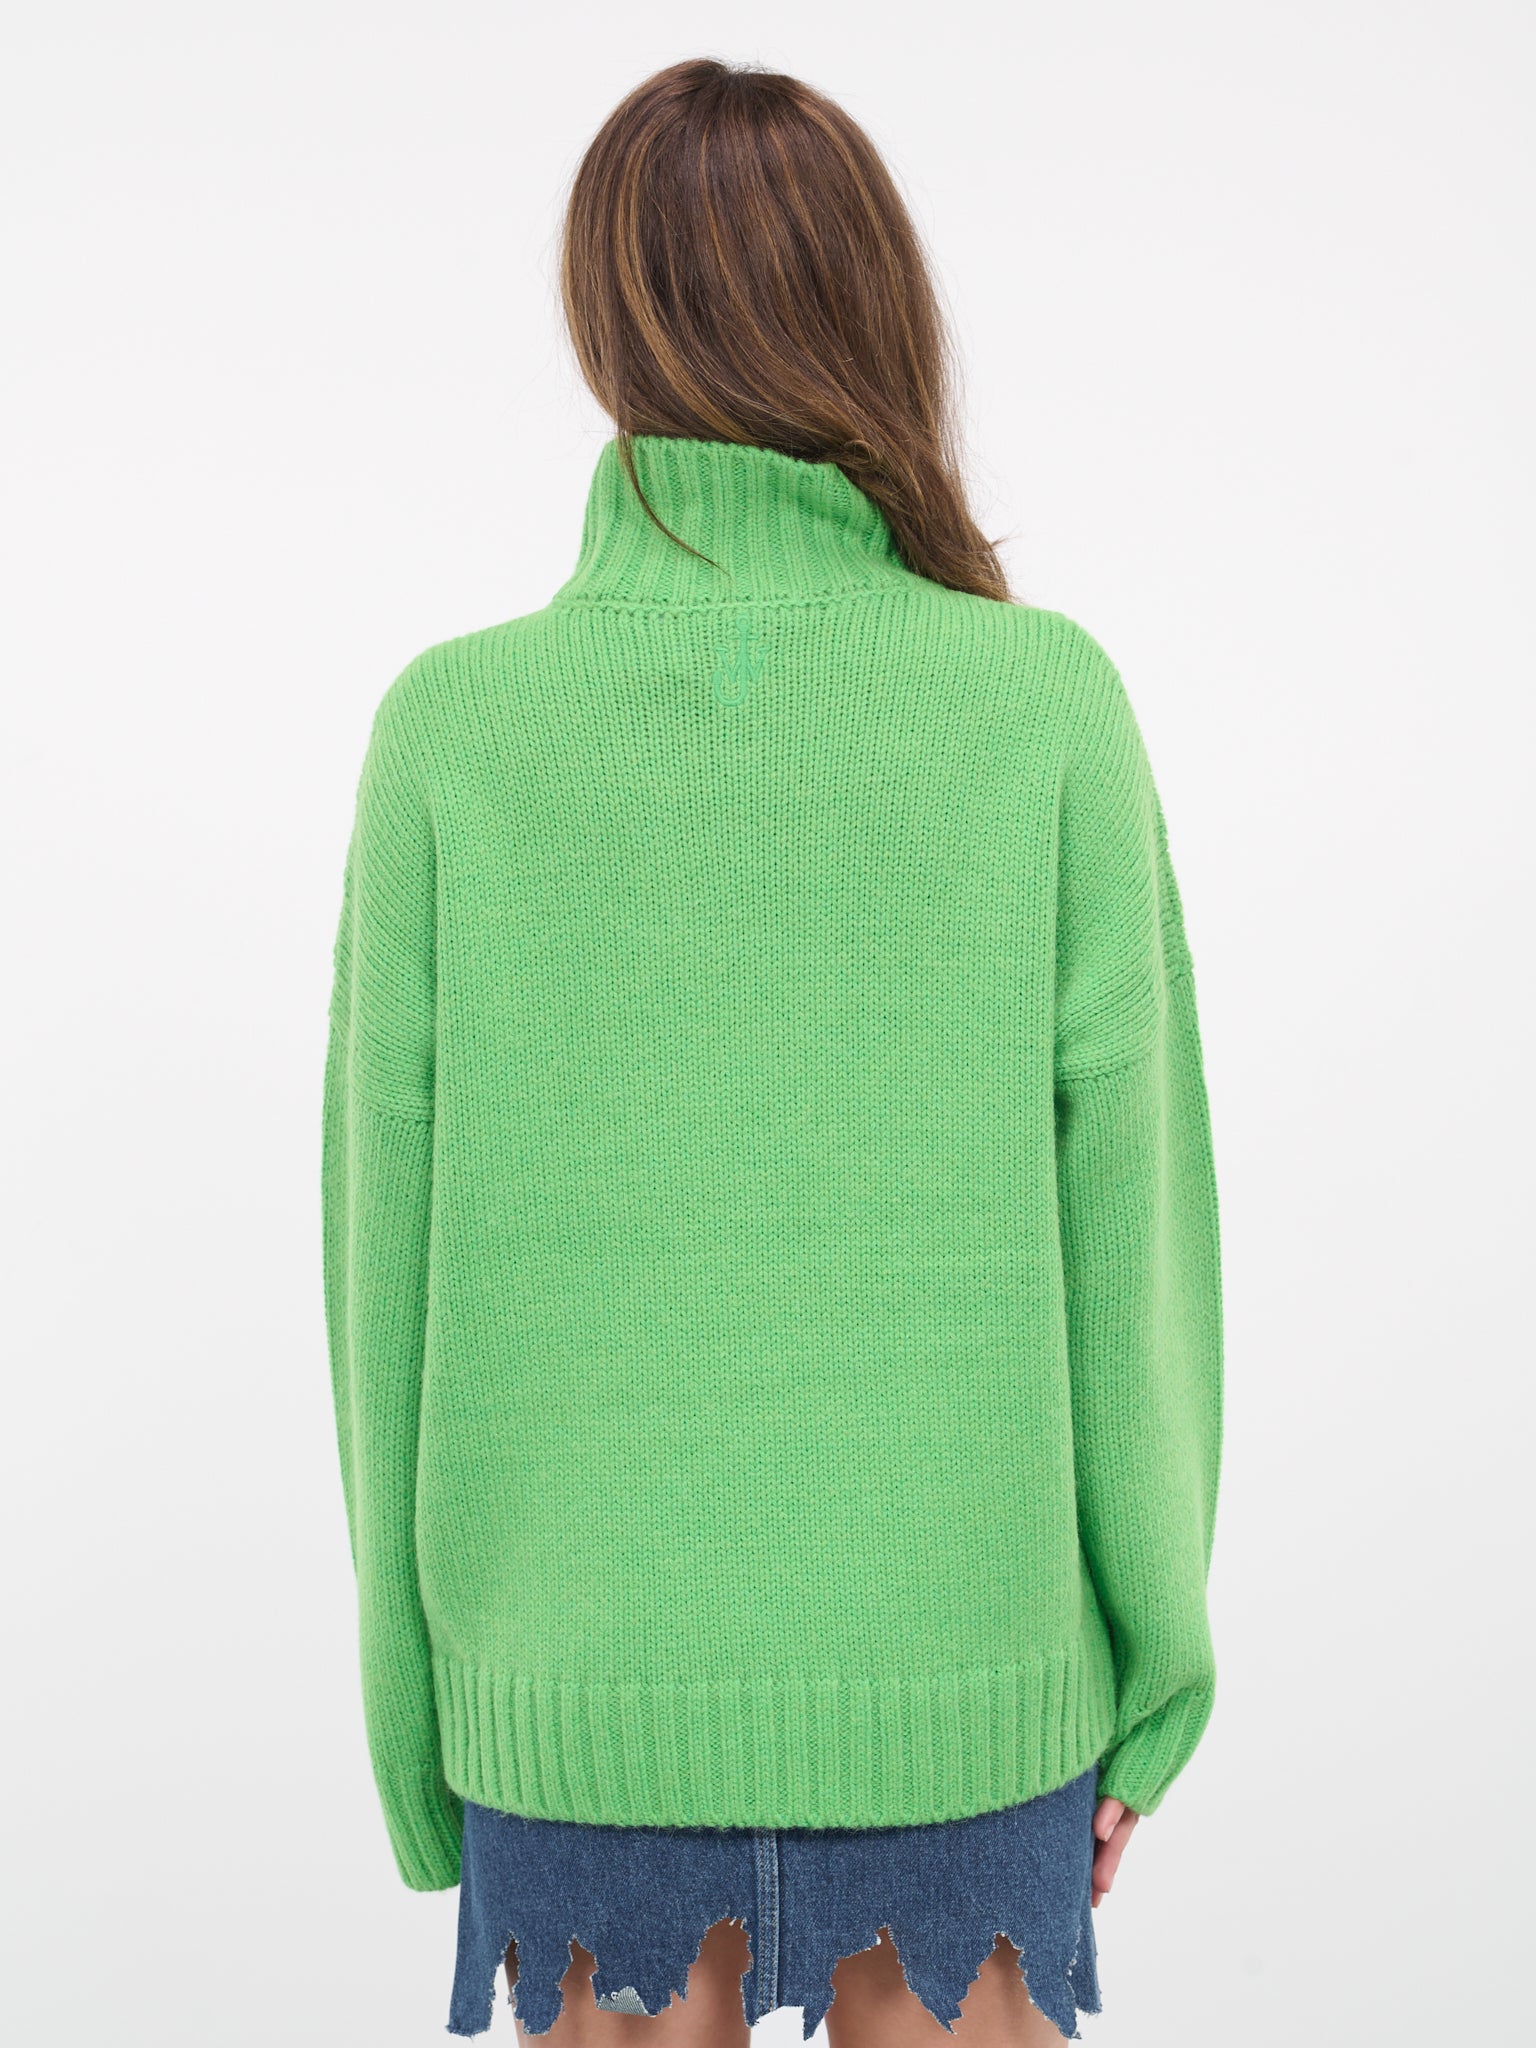 Patched Pocket Knit Jumper (KW0508-497-BRIGHT-GREEN)